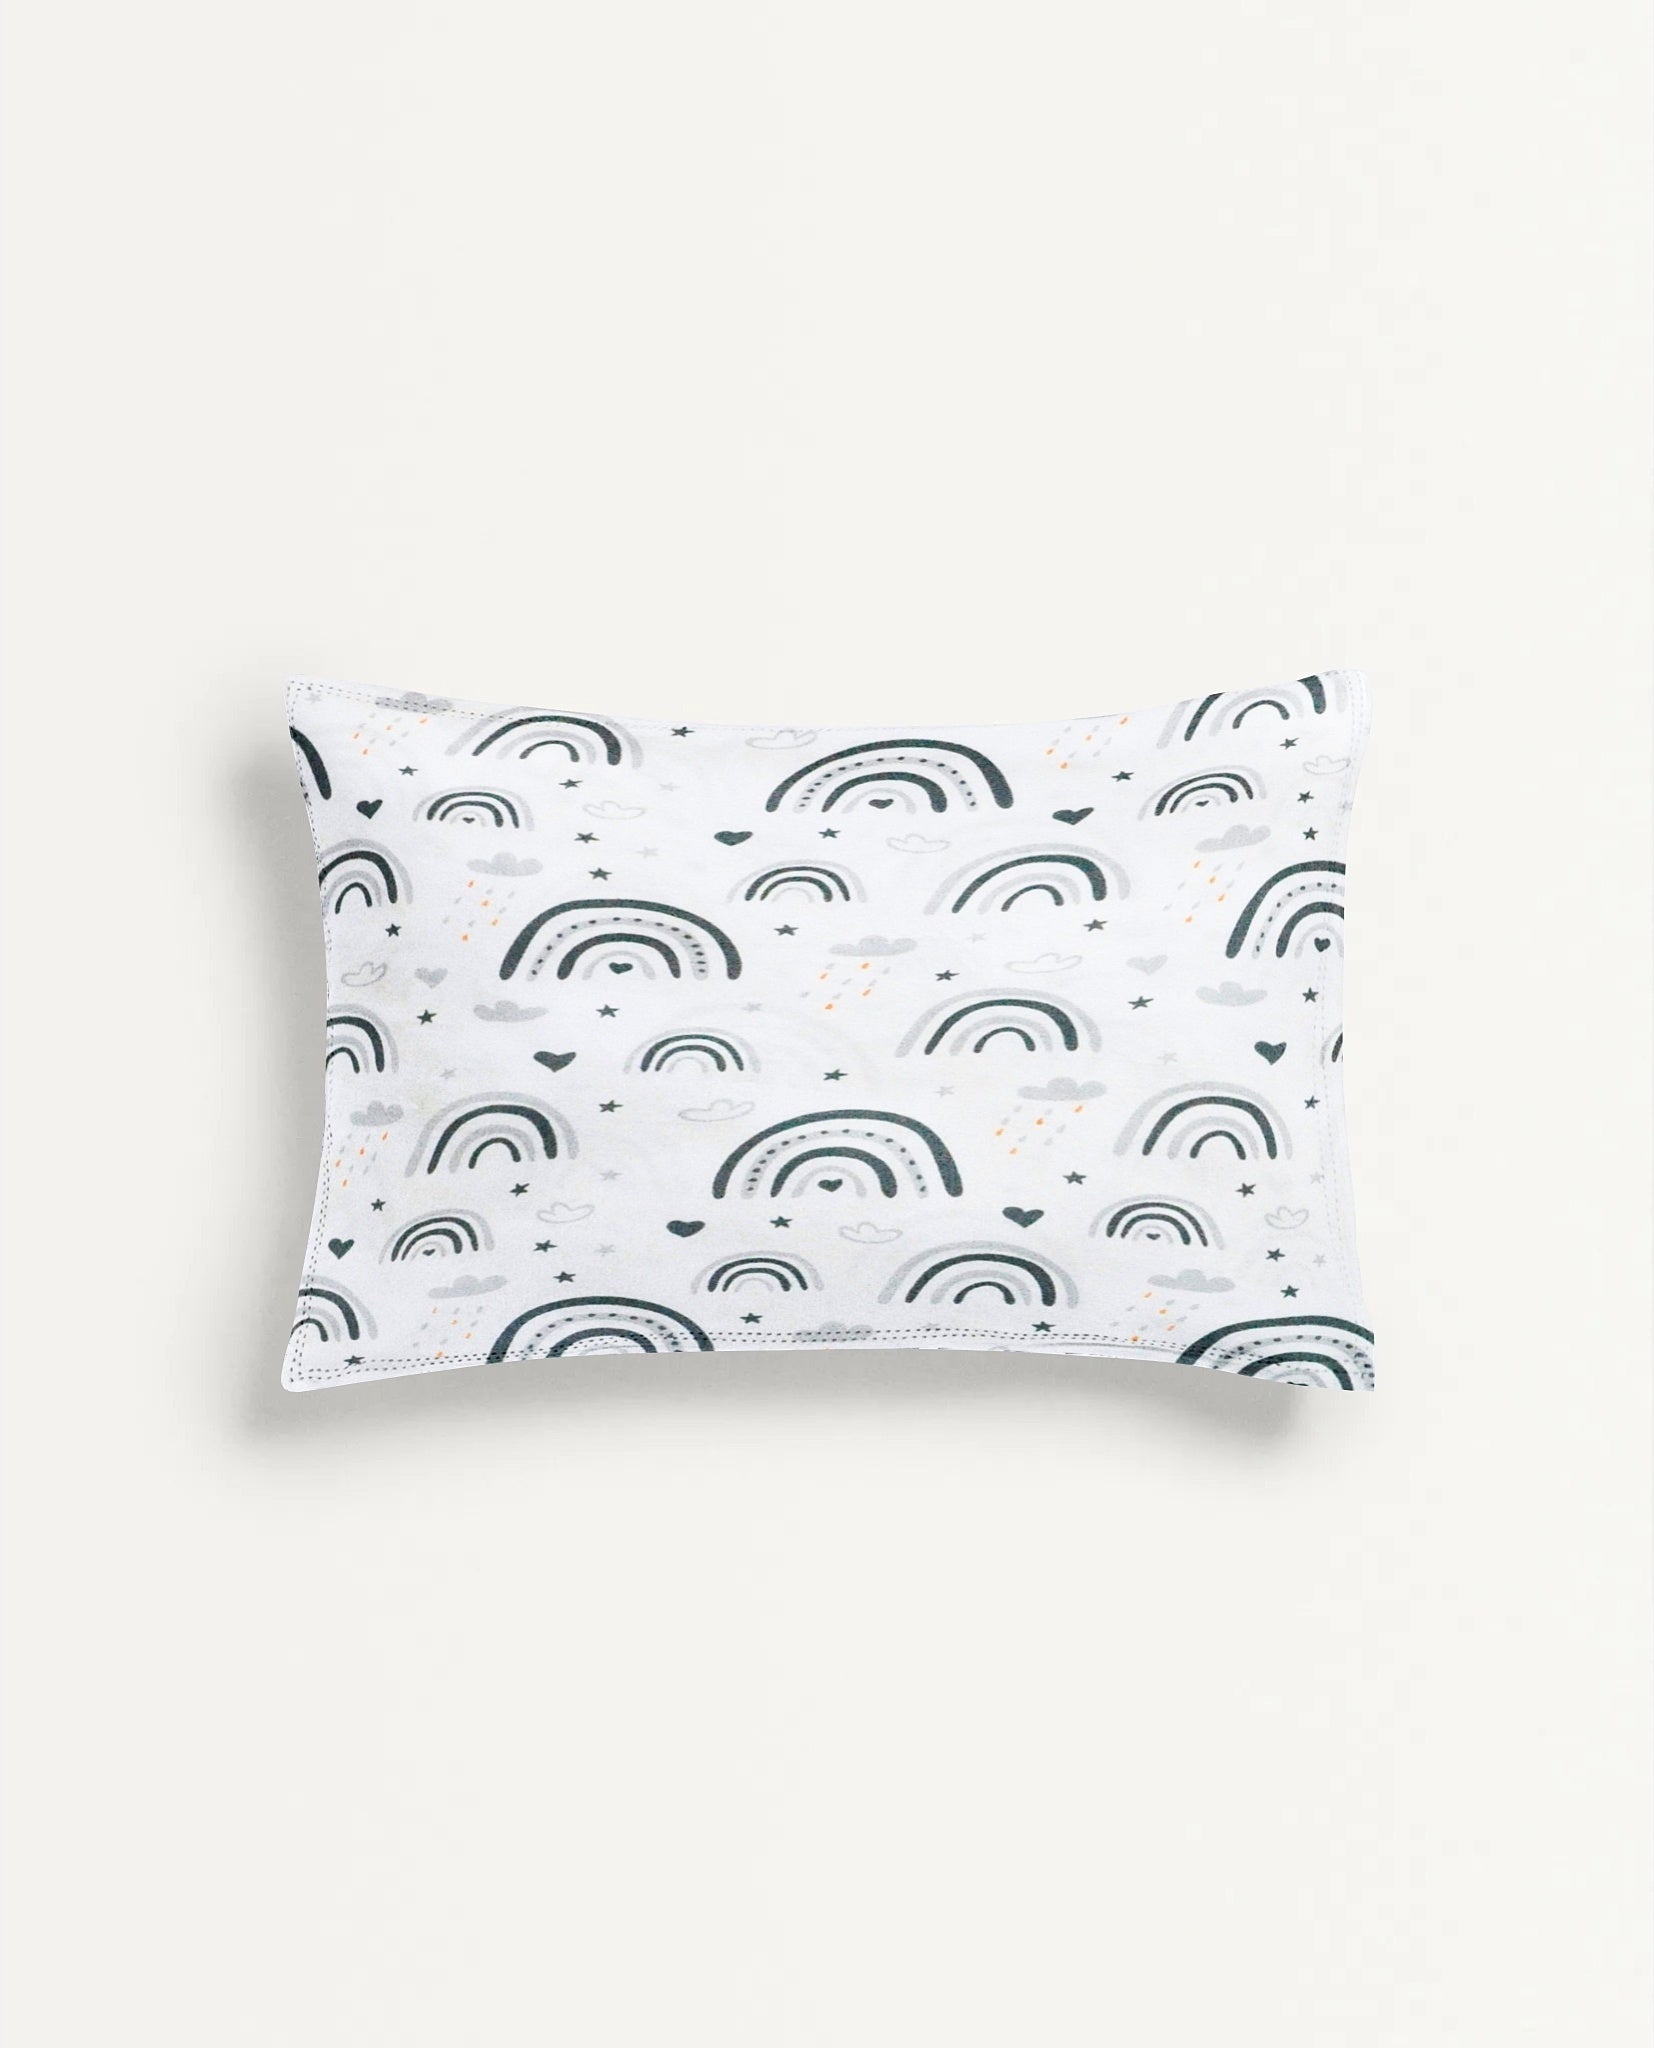 ‘Cloudy Skies’ Organic Baby Pillow Cover